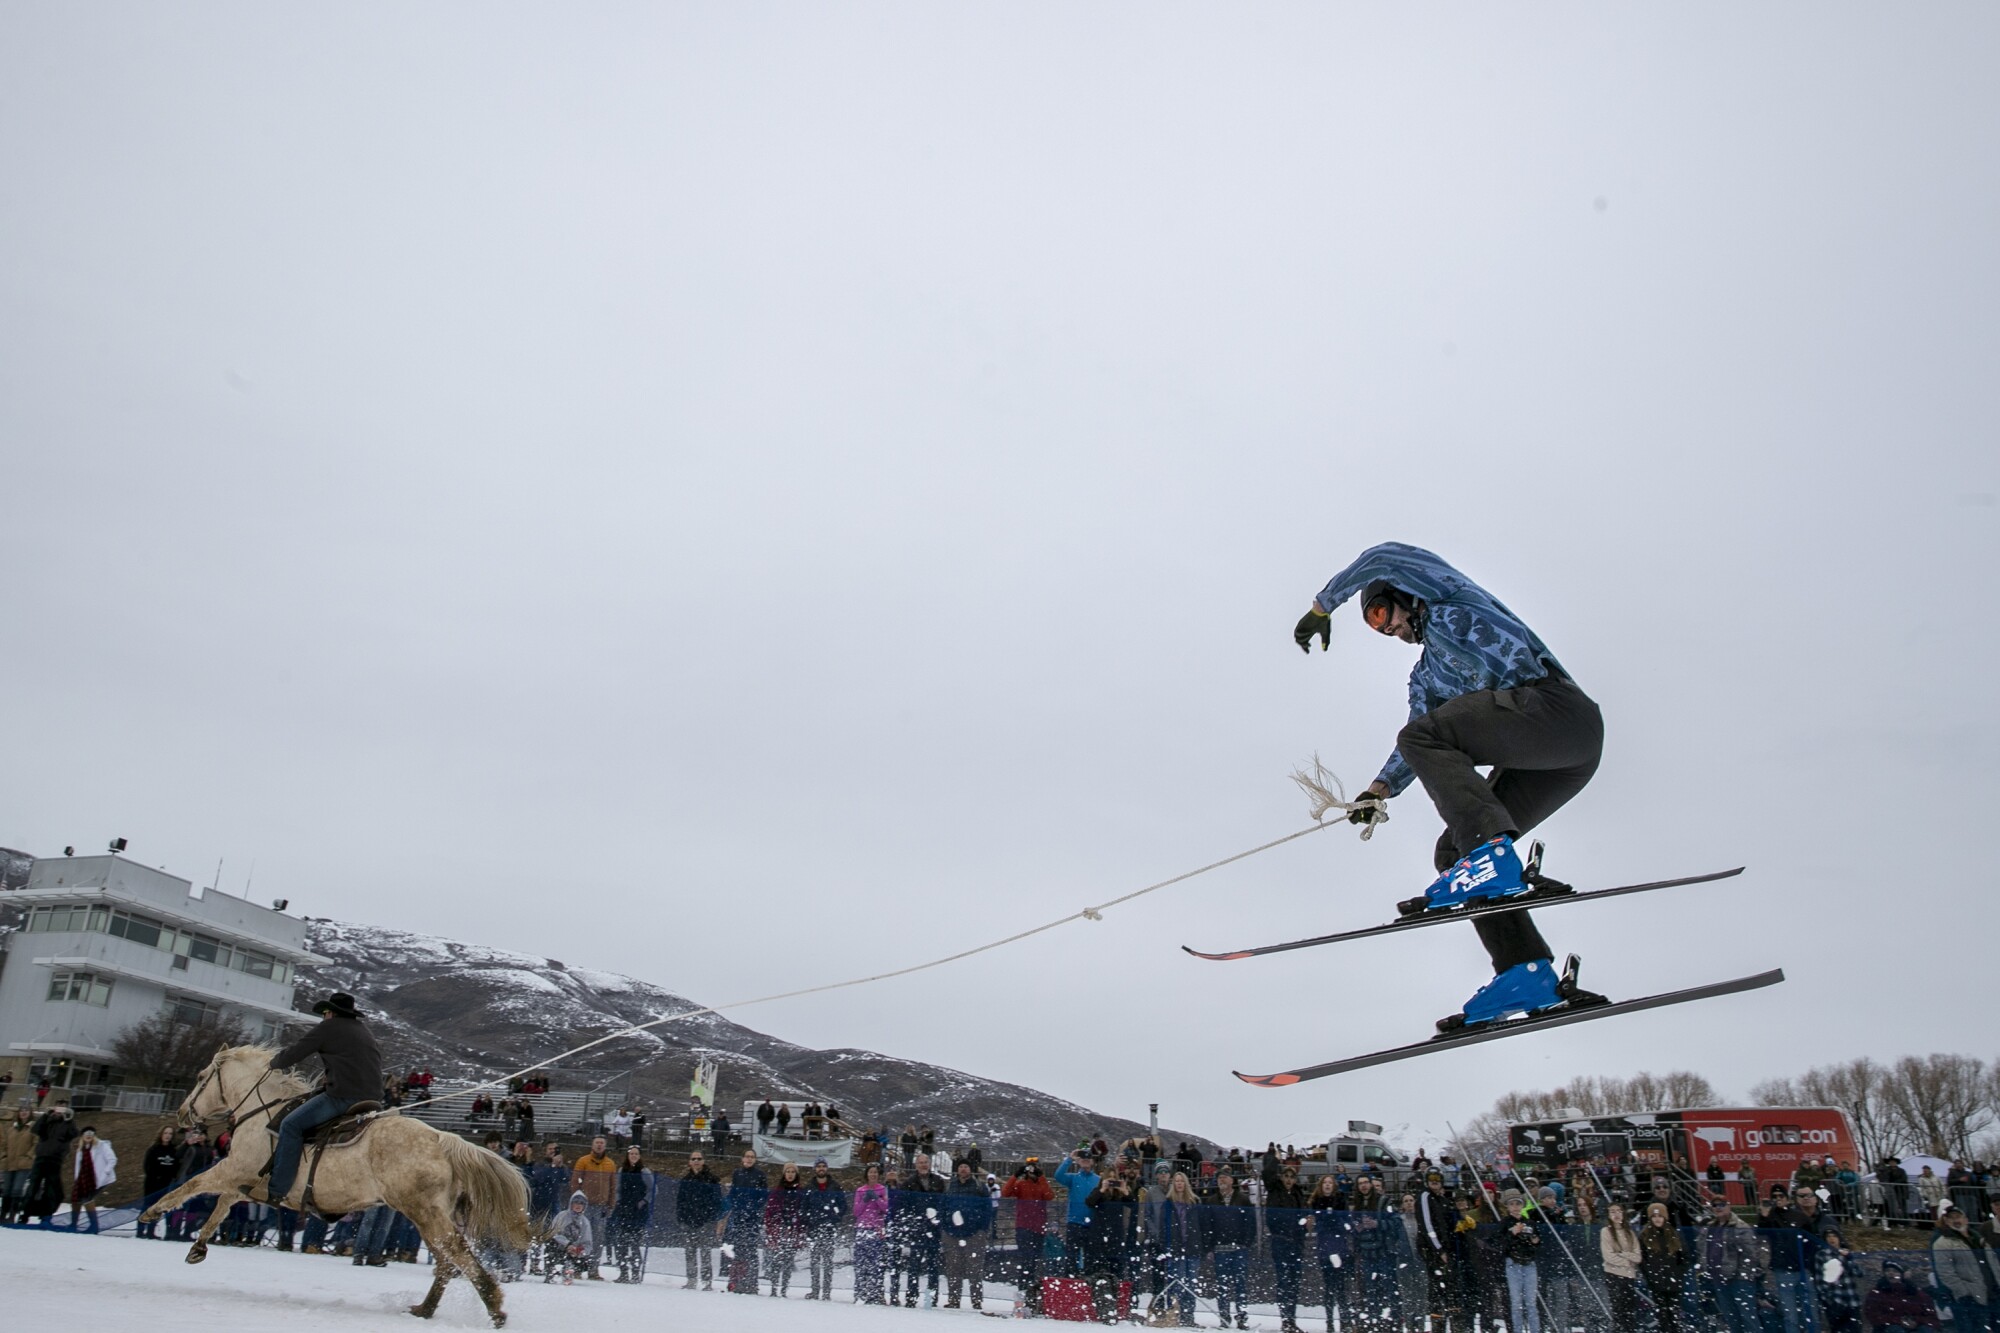 Skijoring features riders pulling skiers through an obstacle course at full speed.